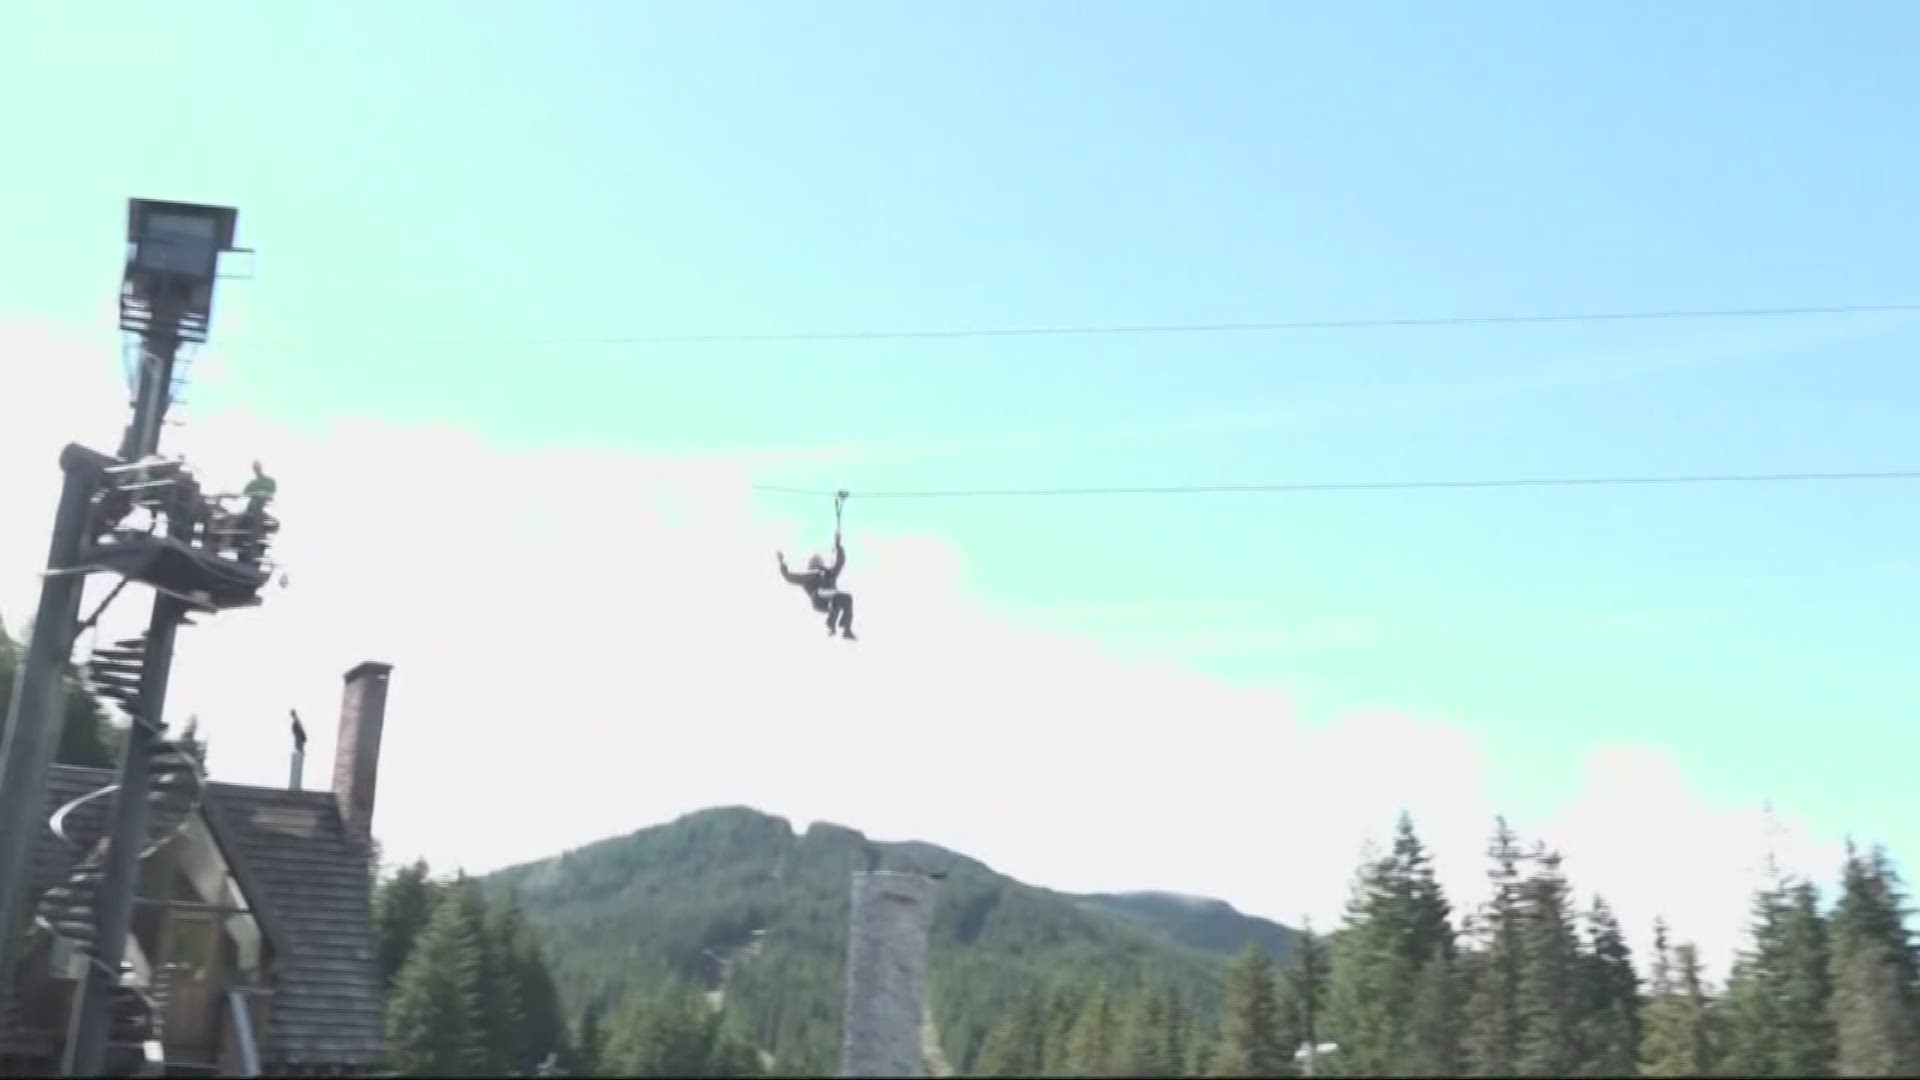 Flying through the air. An Oregon senior center took some folks out for a field trip… to go zip lining at Mount Hood!